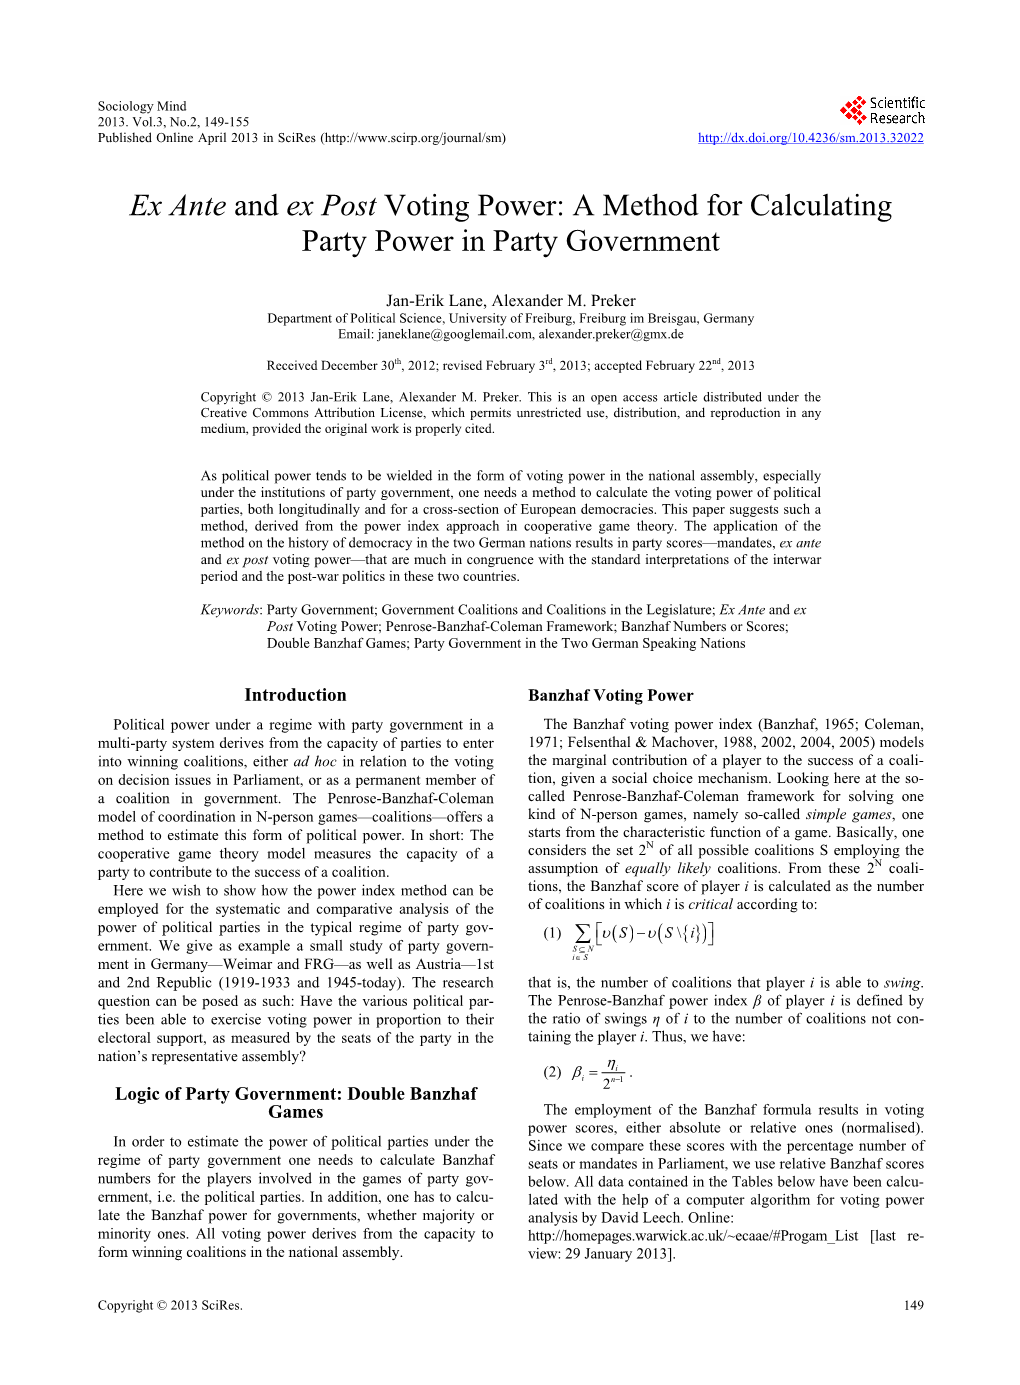 Ex Ante and Ex Post Voting Power: a Method for Calculating Party Power in Party Government